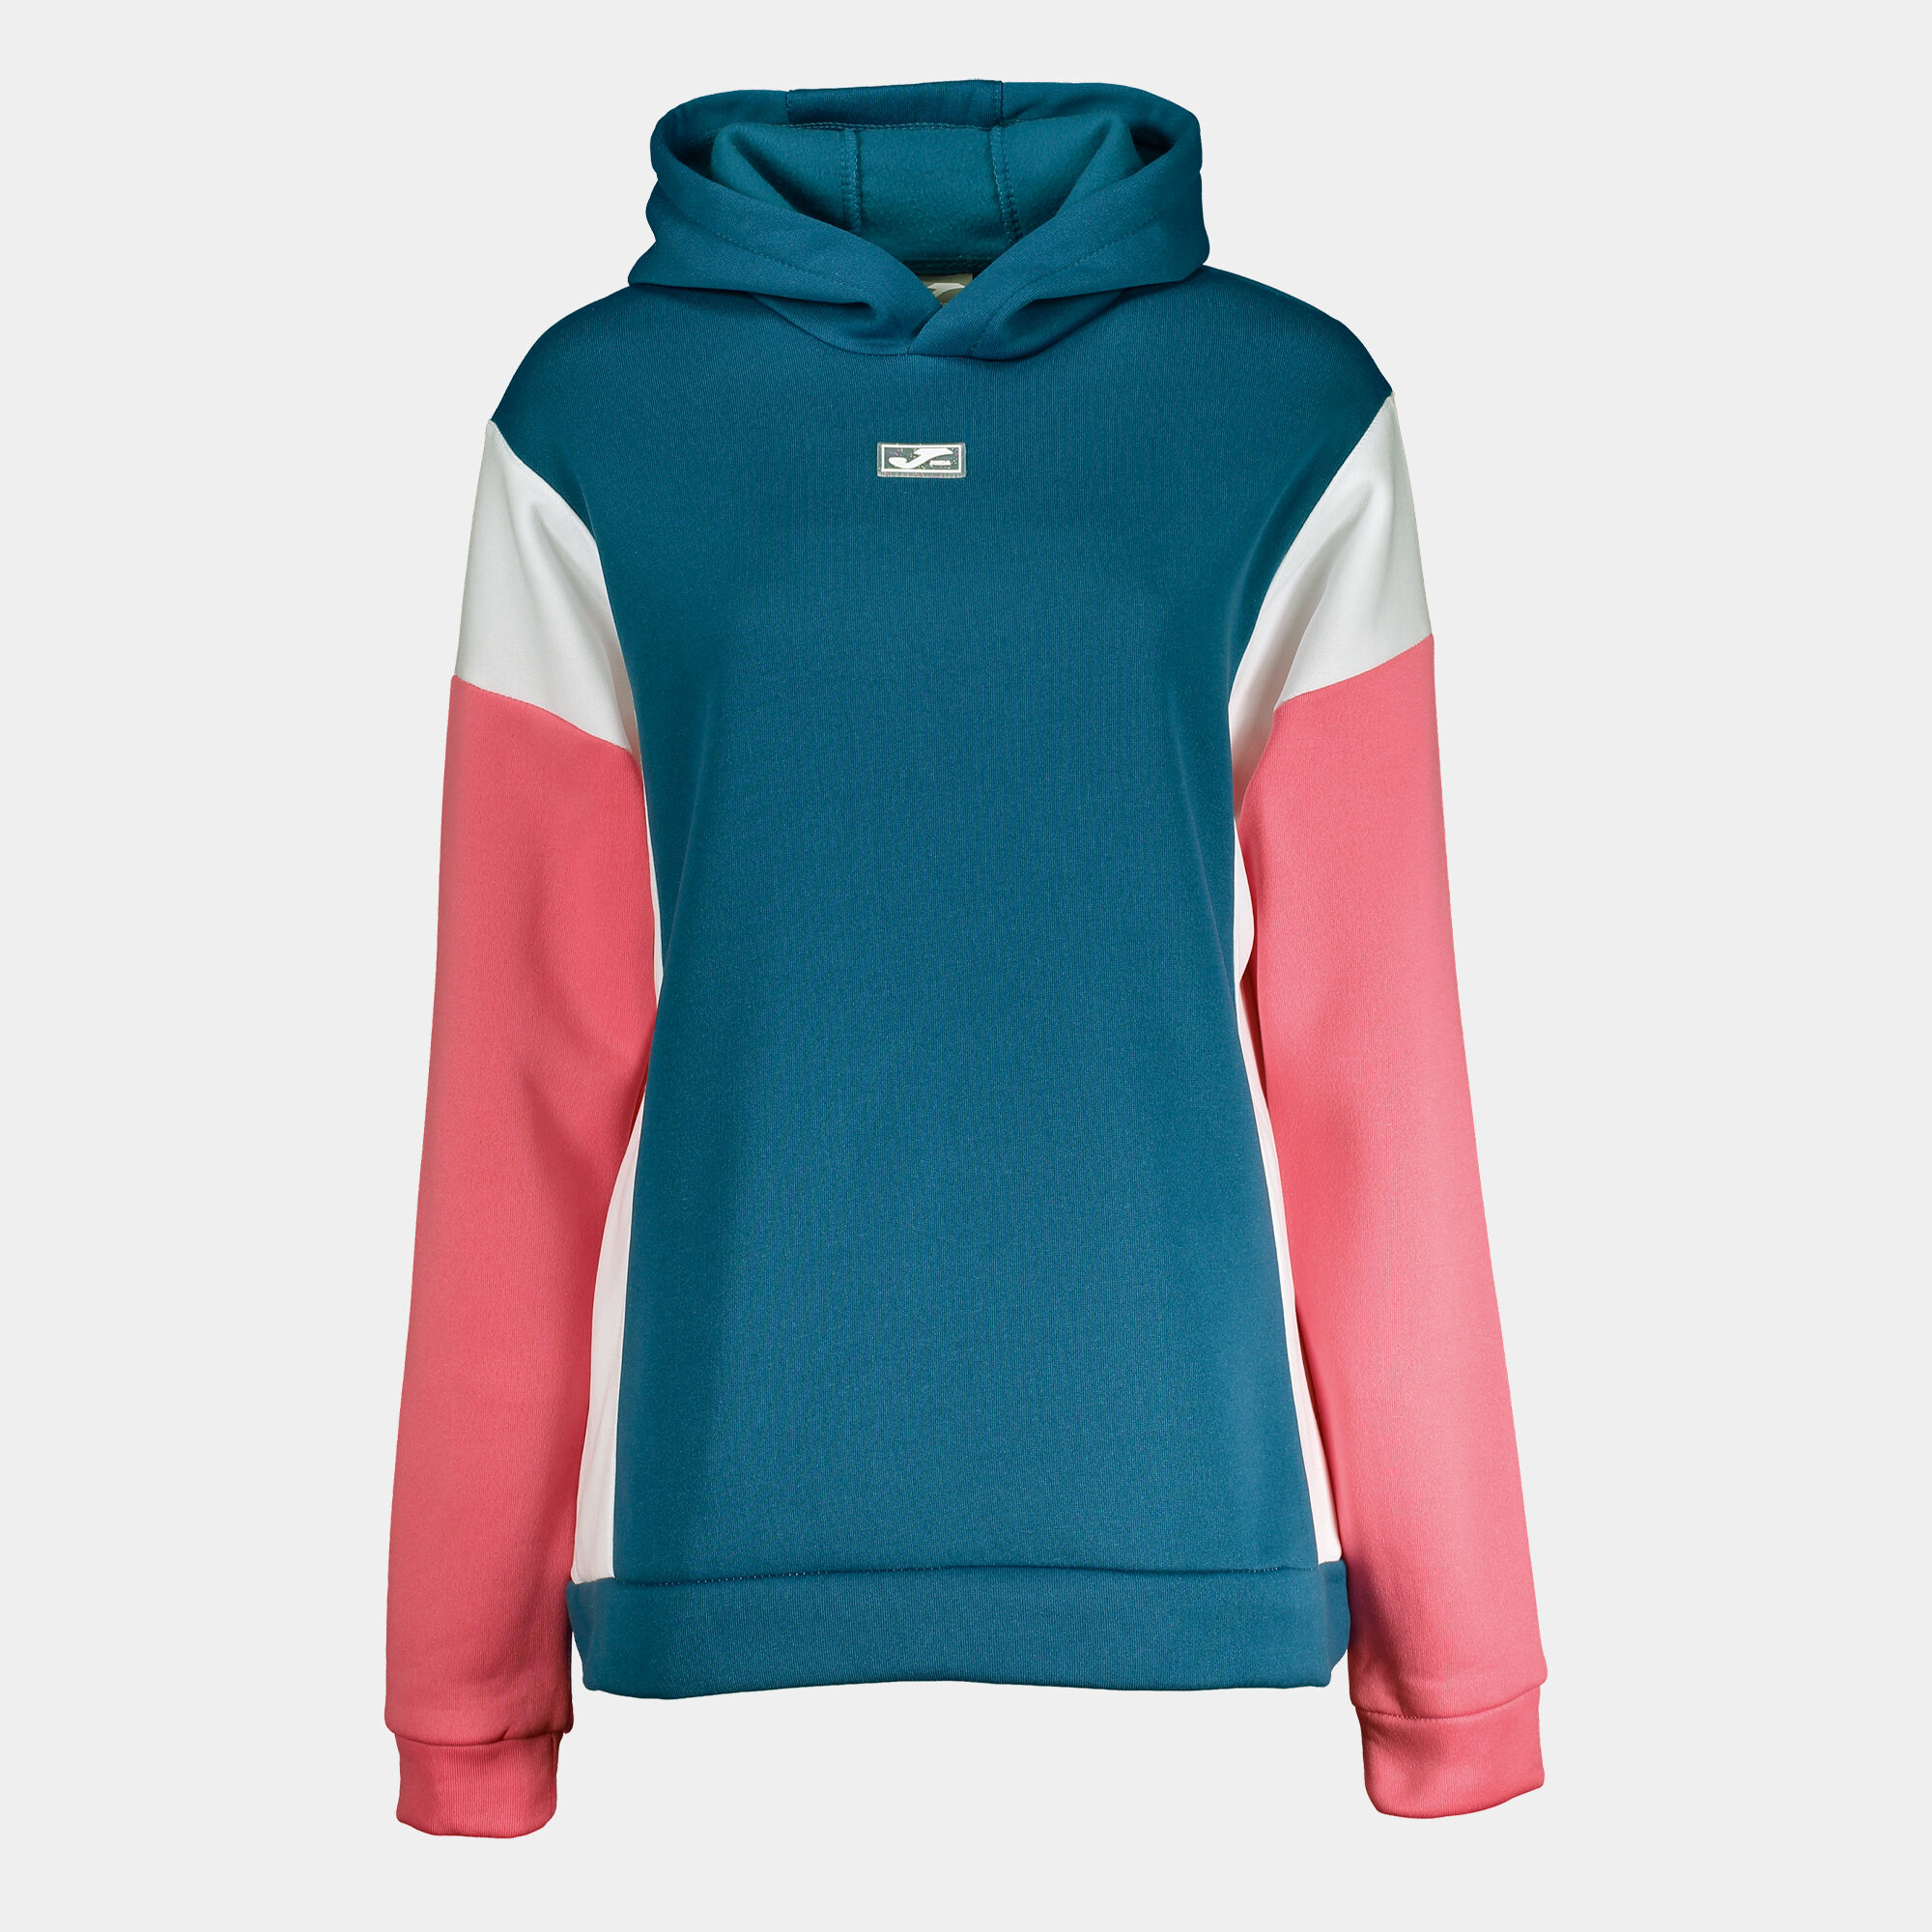 HOODED SWEATER WOMAN PARK BLUE